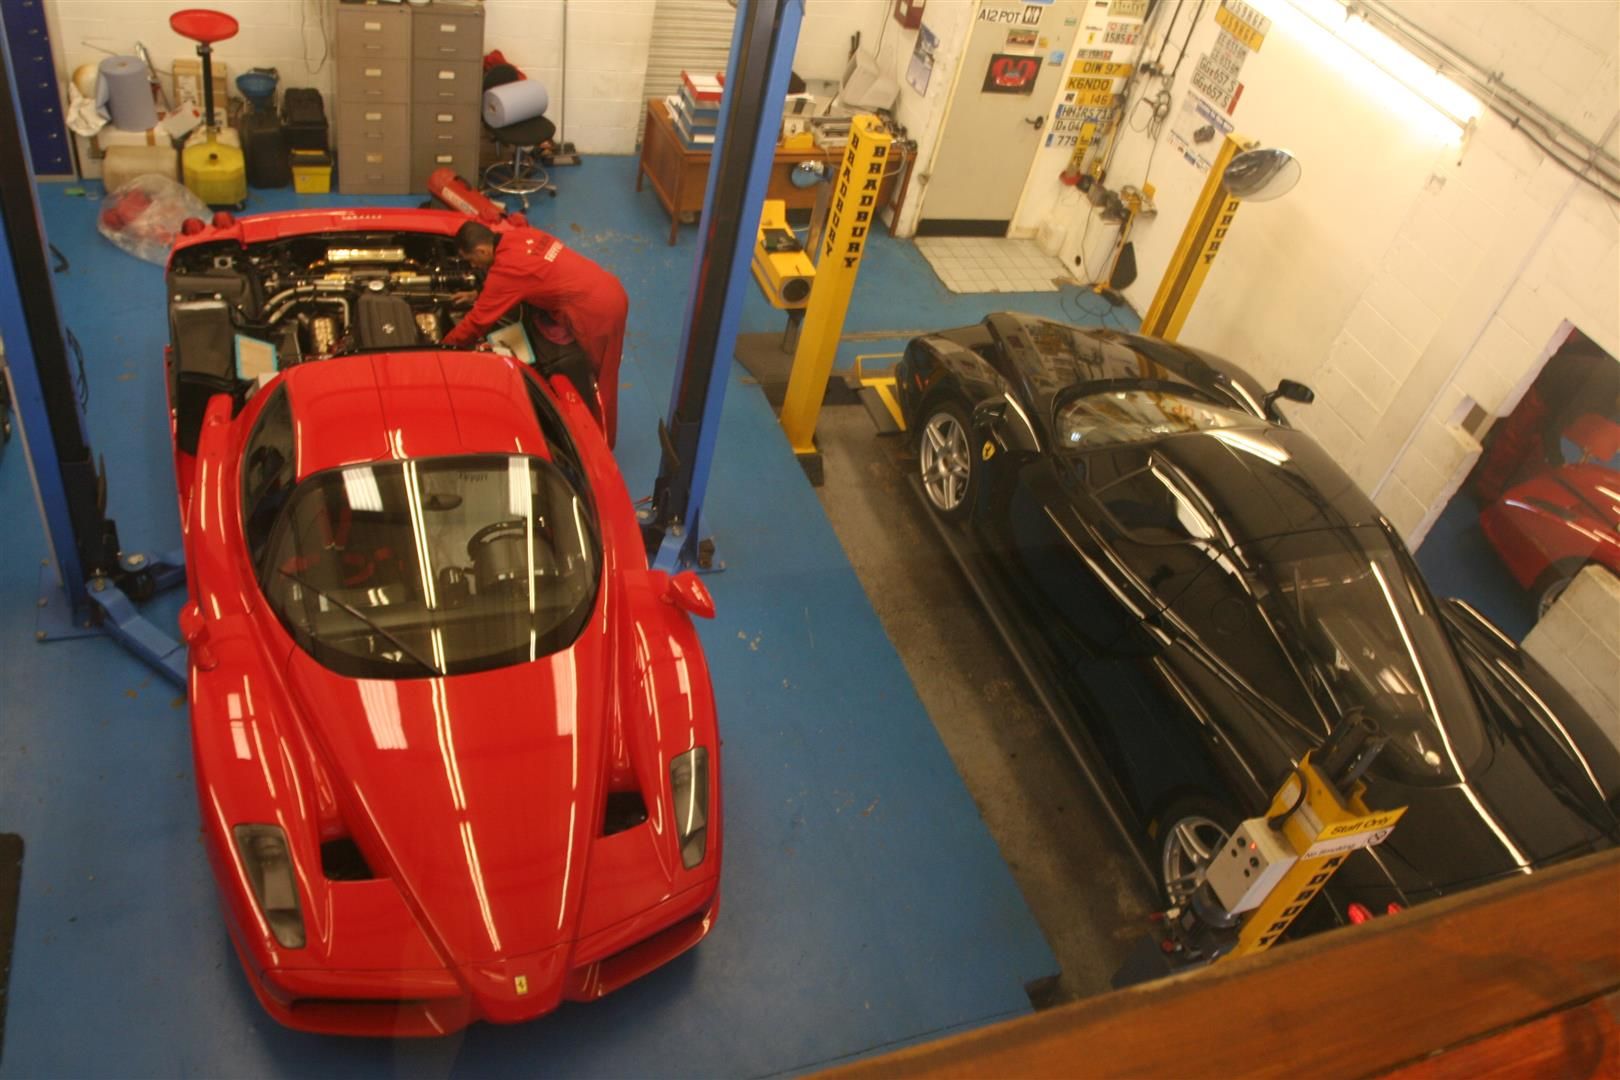 Two Ferrari Enzos in our workshop - Red and Black.